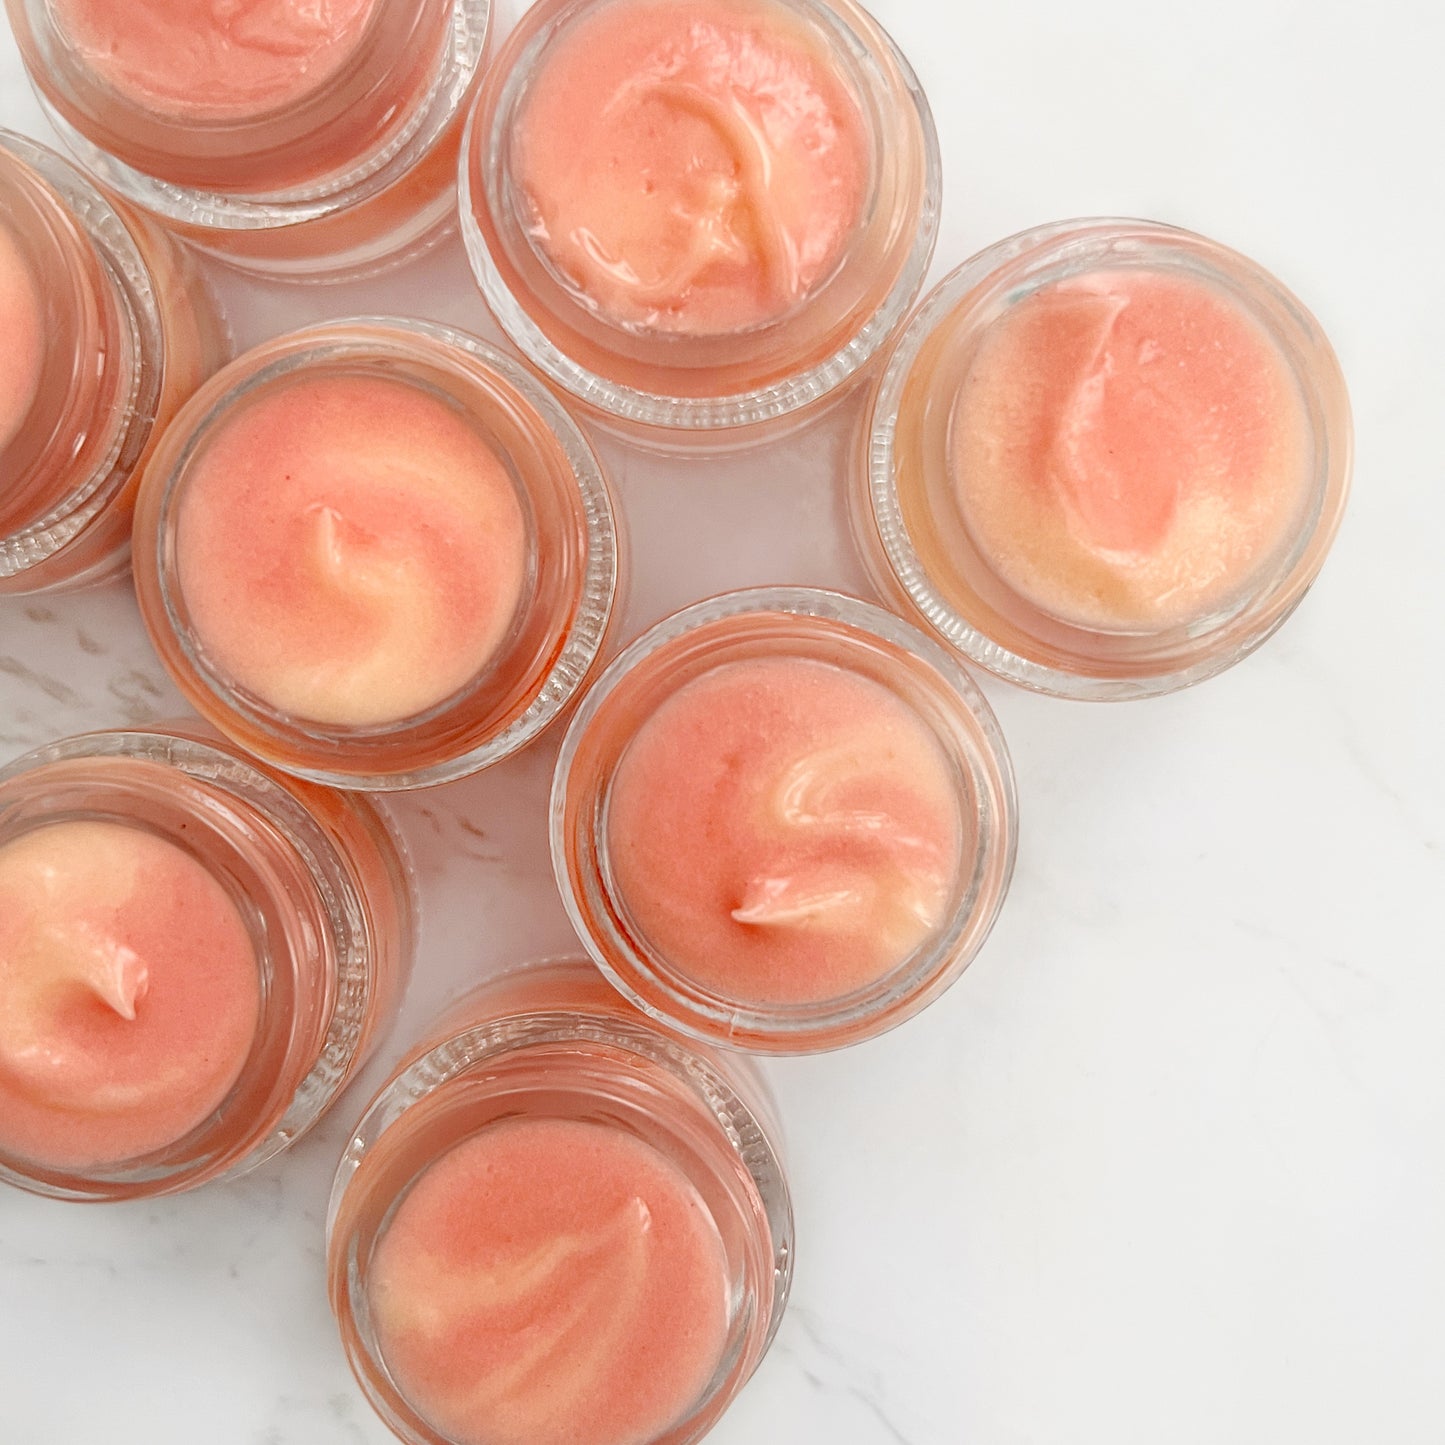 Batch of Hydrating Lip Masques: A diverse assortment of our nourishing lip treatment jars arranged in a captivating flat lay, showcasing the variety and quality of our lip-enhancing formula.